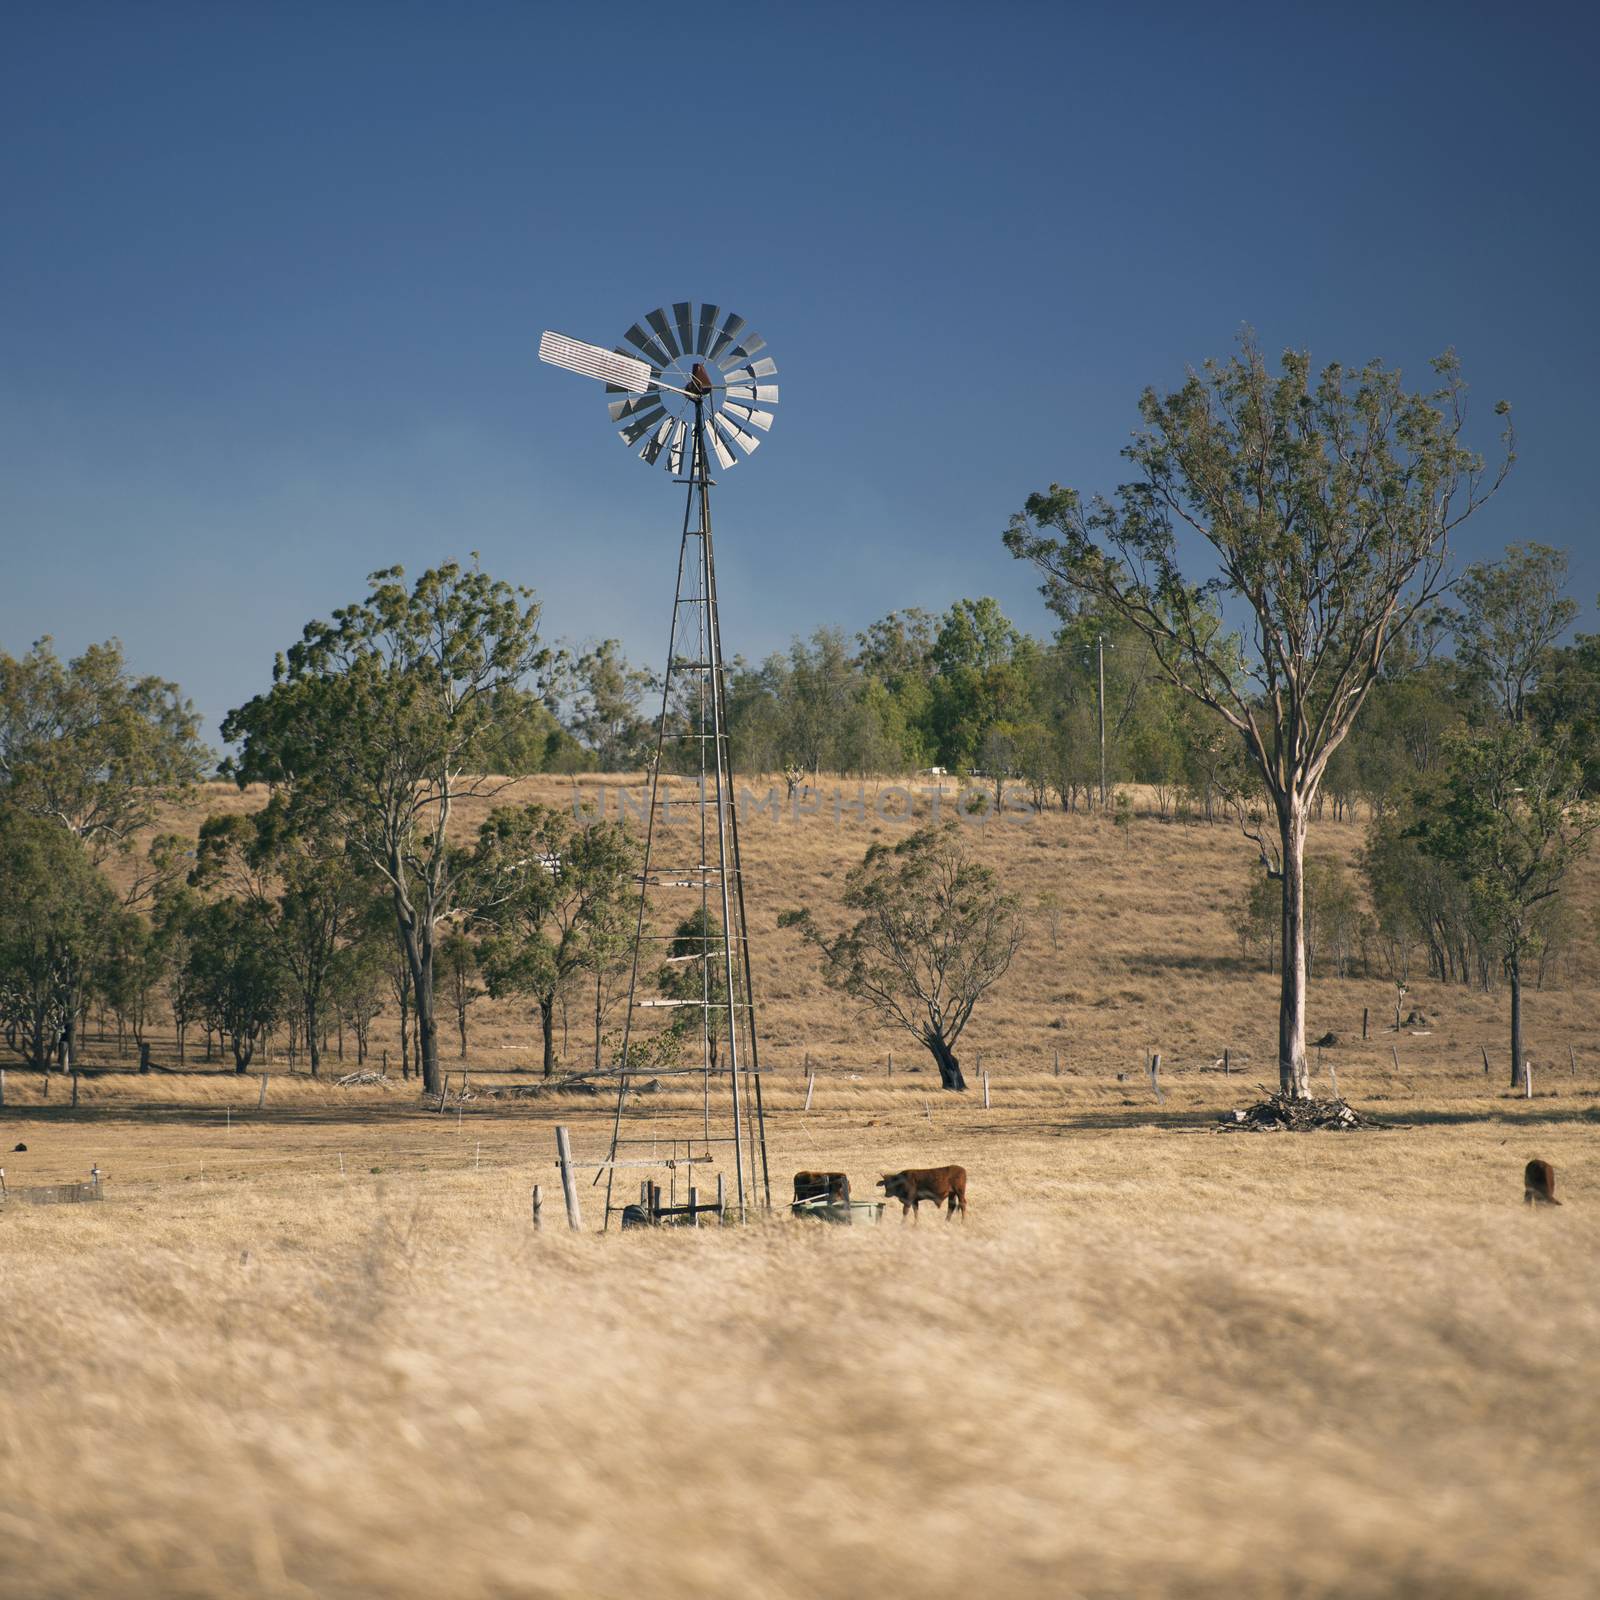 Windmill and cows in the countryside during the day. by artistrobd